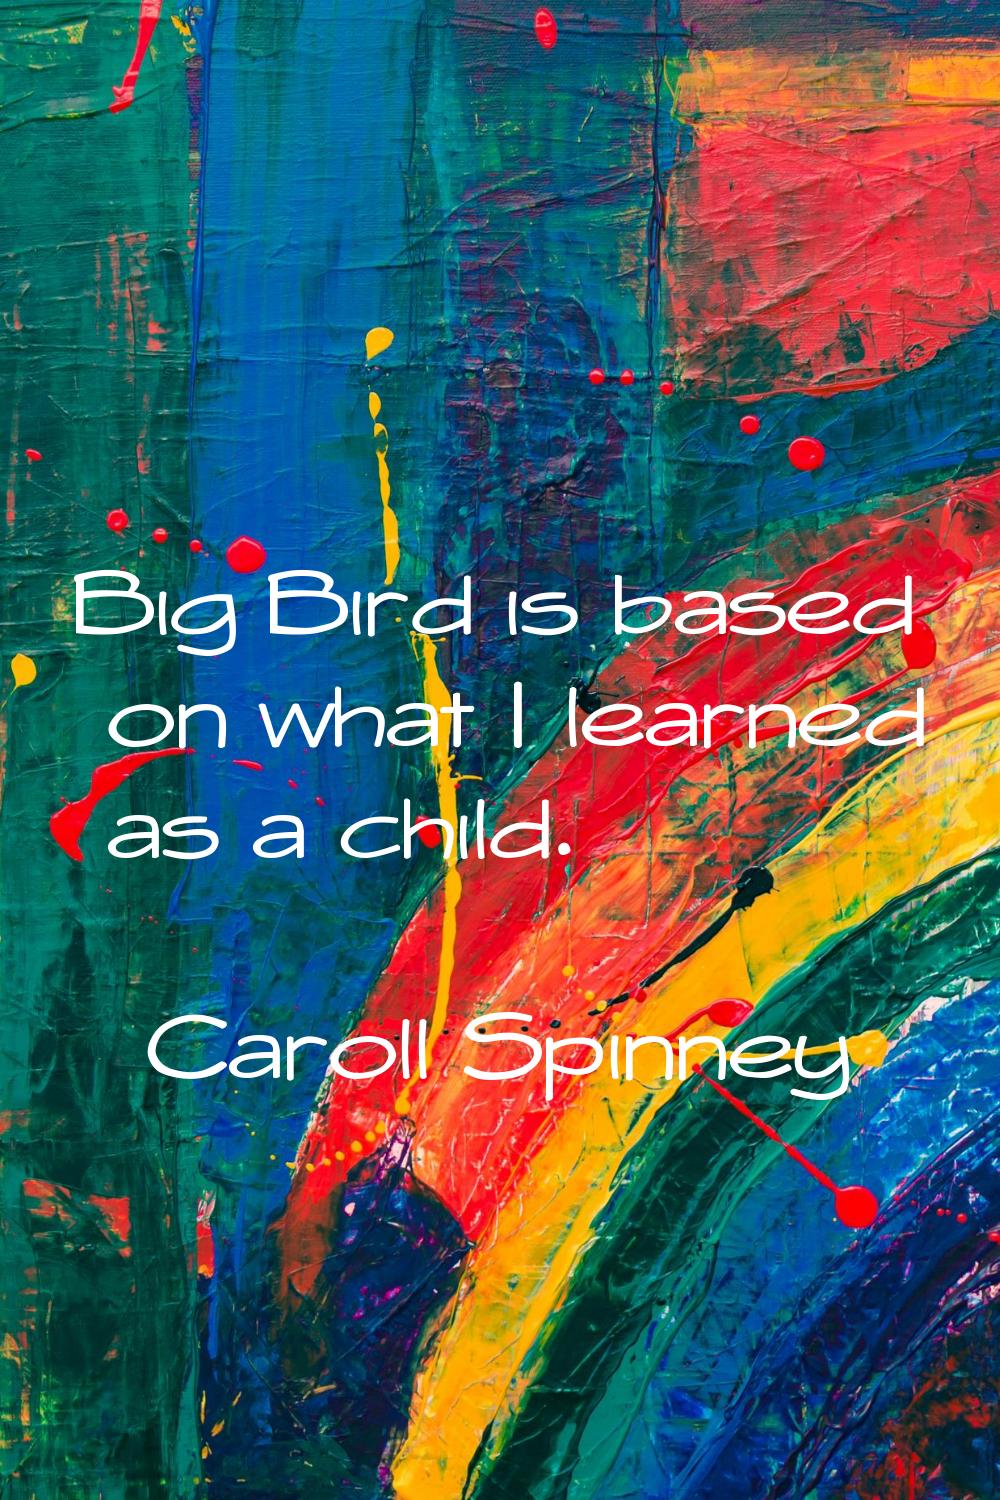 Big Bird is based on what I learned as a child.